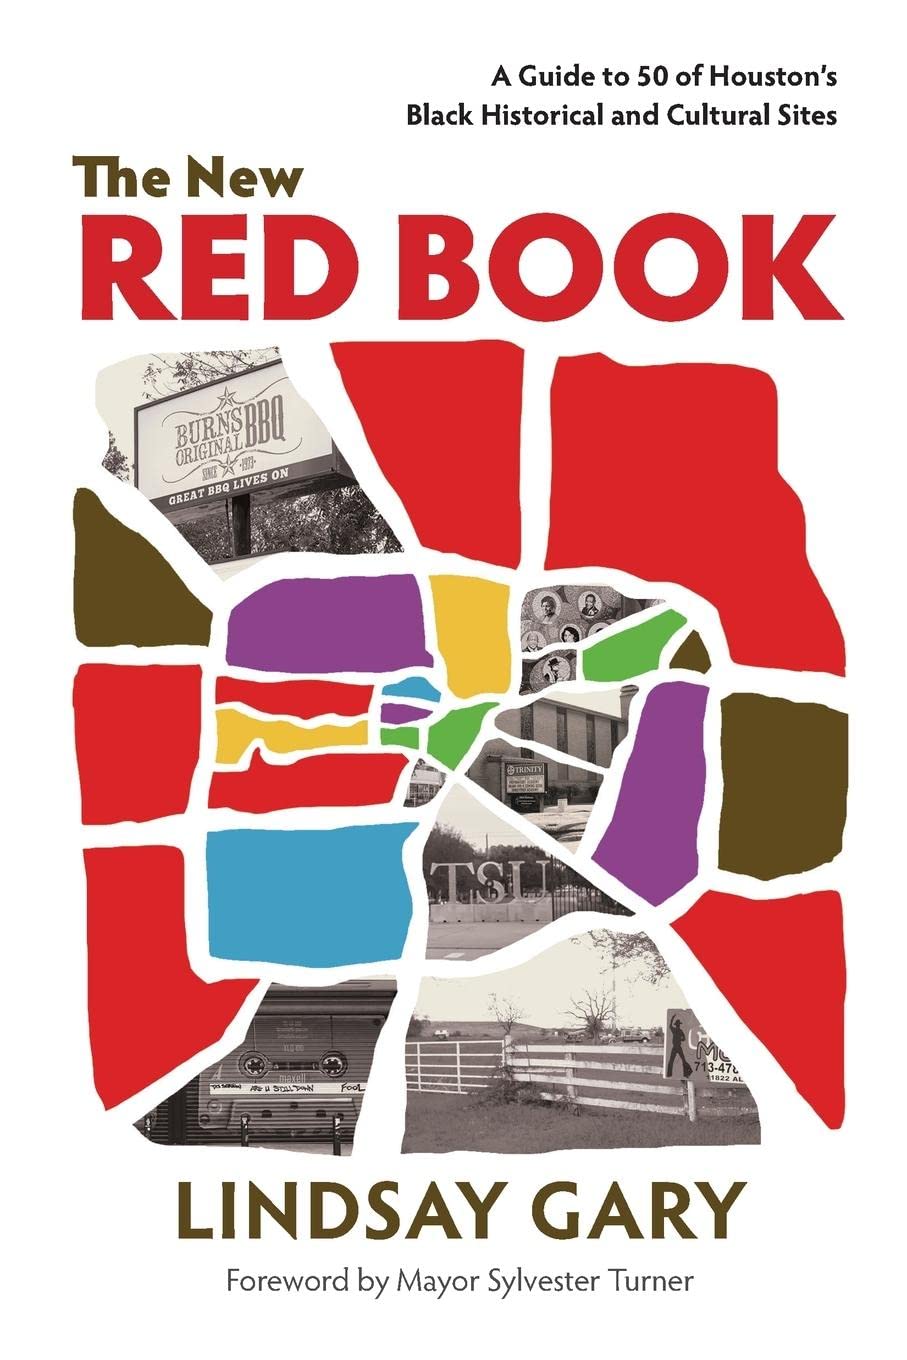 The New Red Book: A Guide to 50 of Houston's Black Historical and Cultural Sites